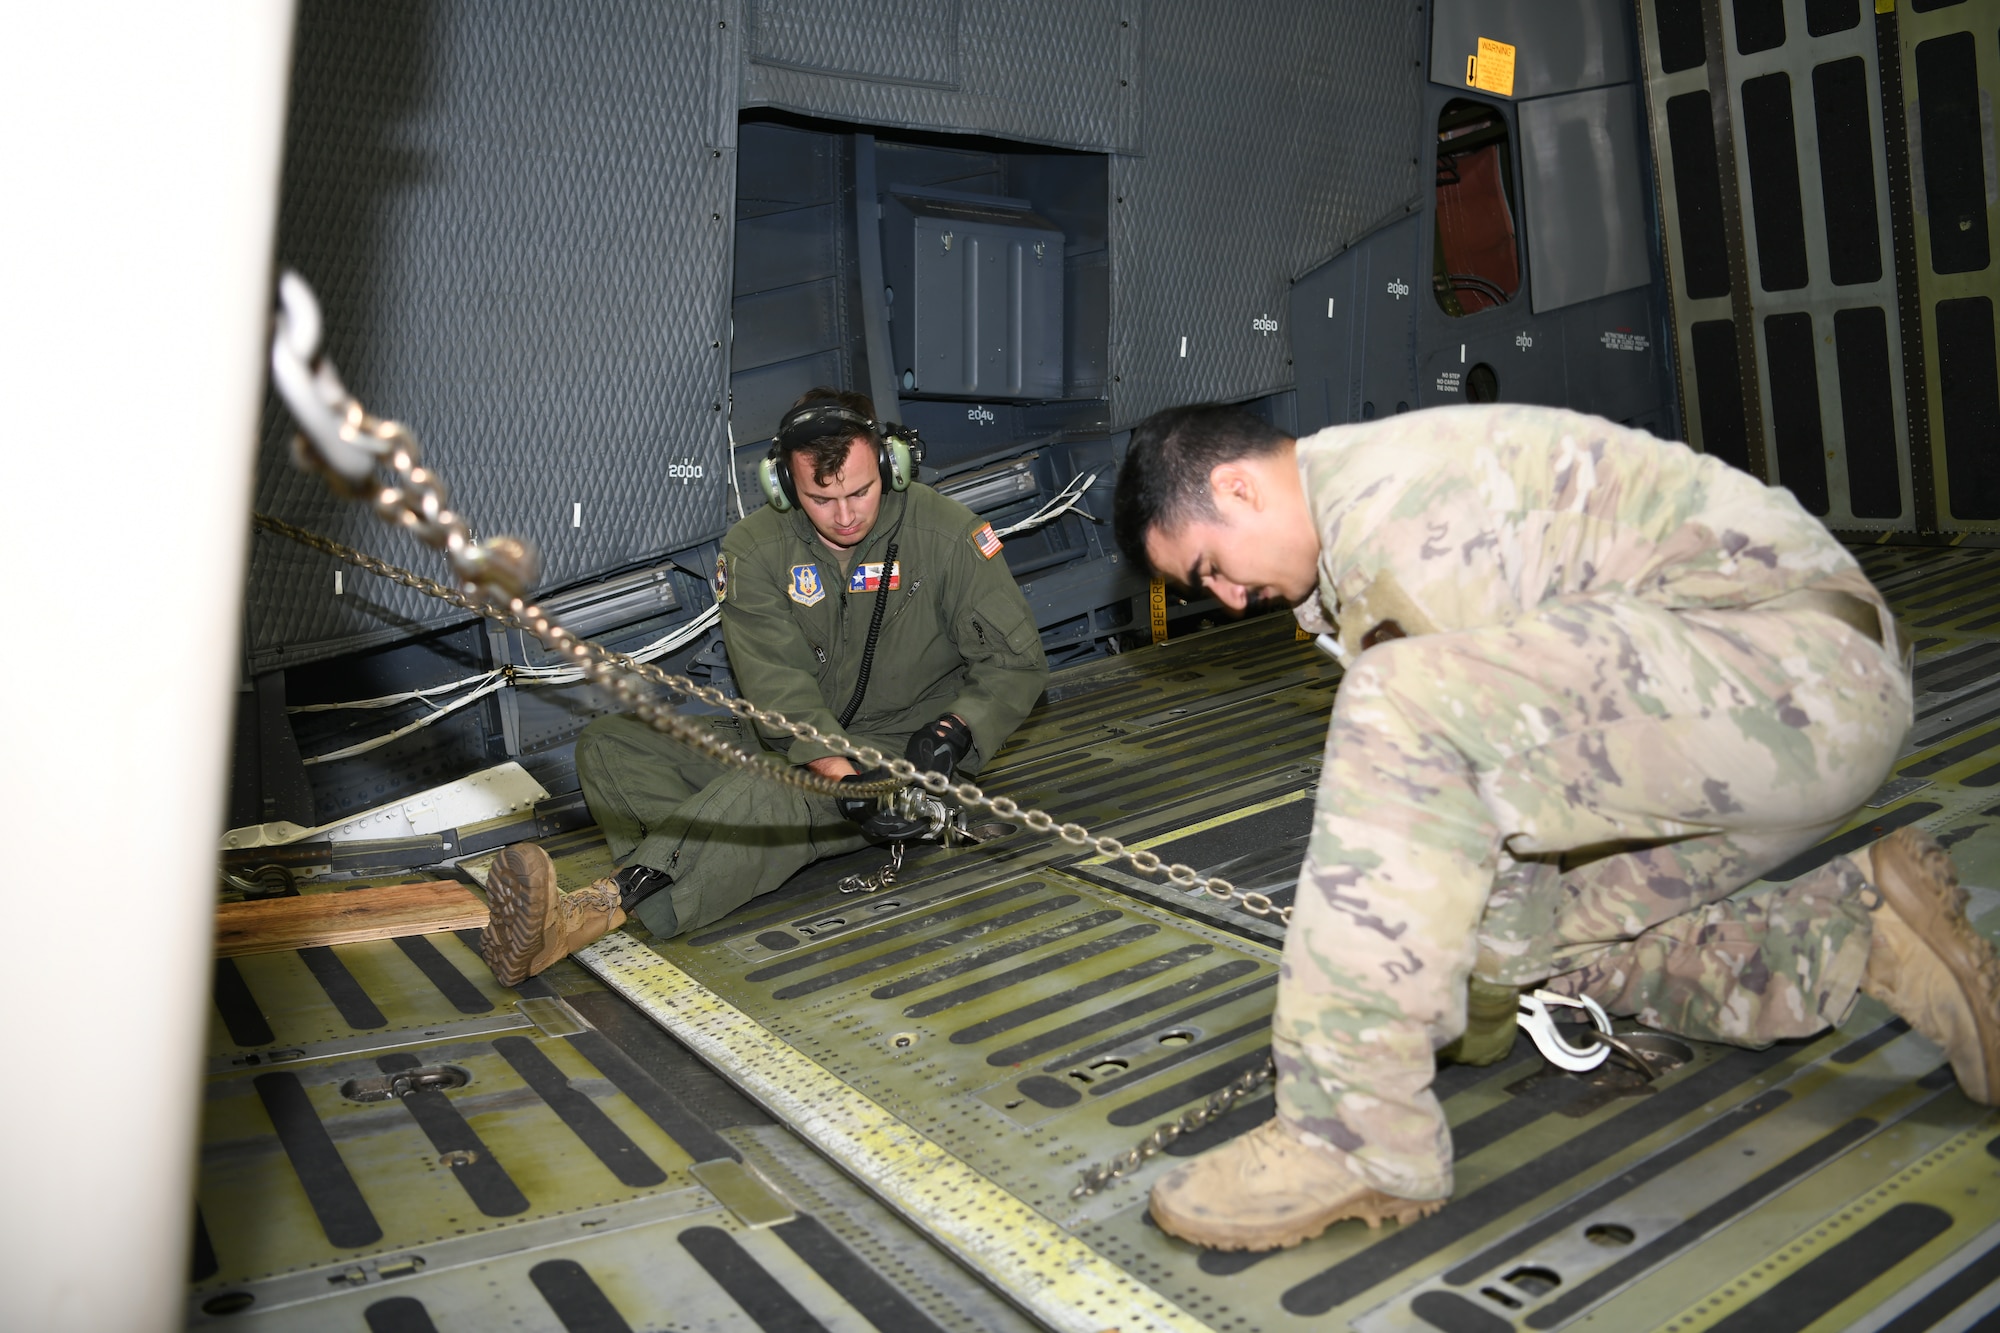 Staff Sgt. Stuart Martin, 68th Airlift Squadron loadmaster (left), secures cargo to the floor of a C-5M Super Galaxy aircraft Sept. 13, 2021 at Joint Base San Antonio-Lackland, Texas. Martin was working to regain his loadmaster certifications following a motorcycle accident where he lost a leg. (U.S. Air Force photo by Master Sgt. Kristian Carter)